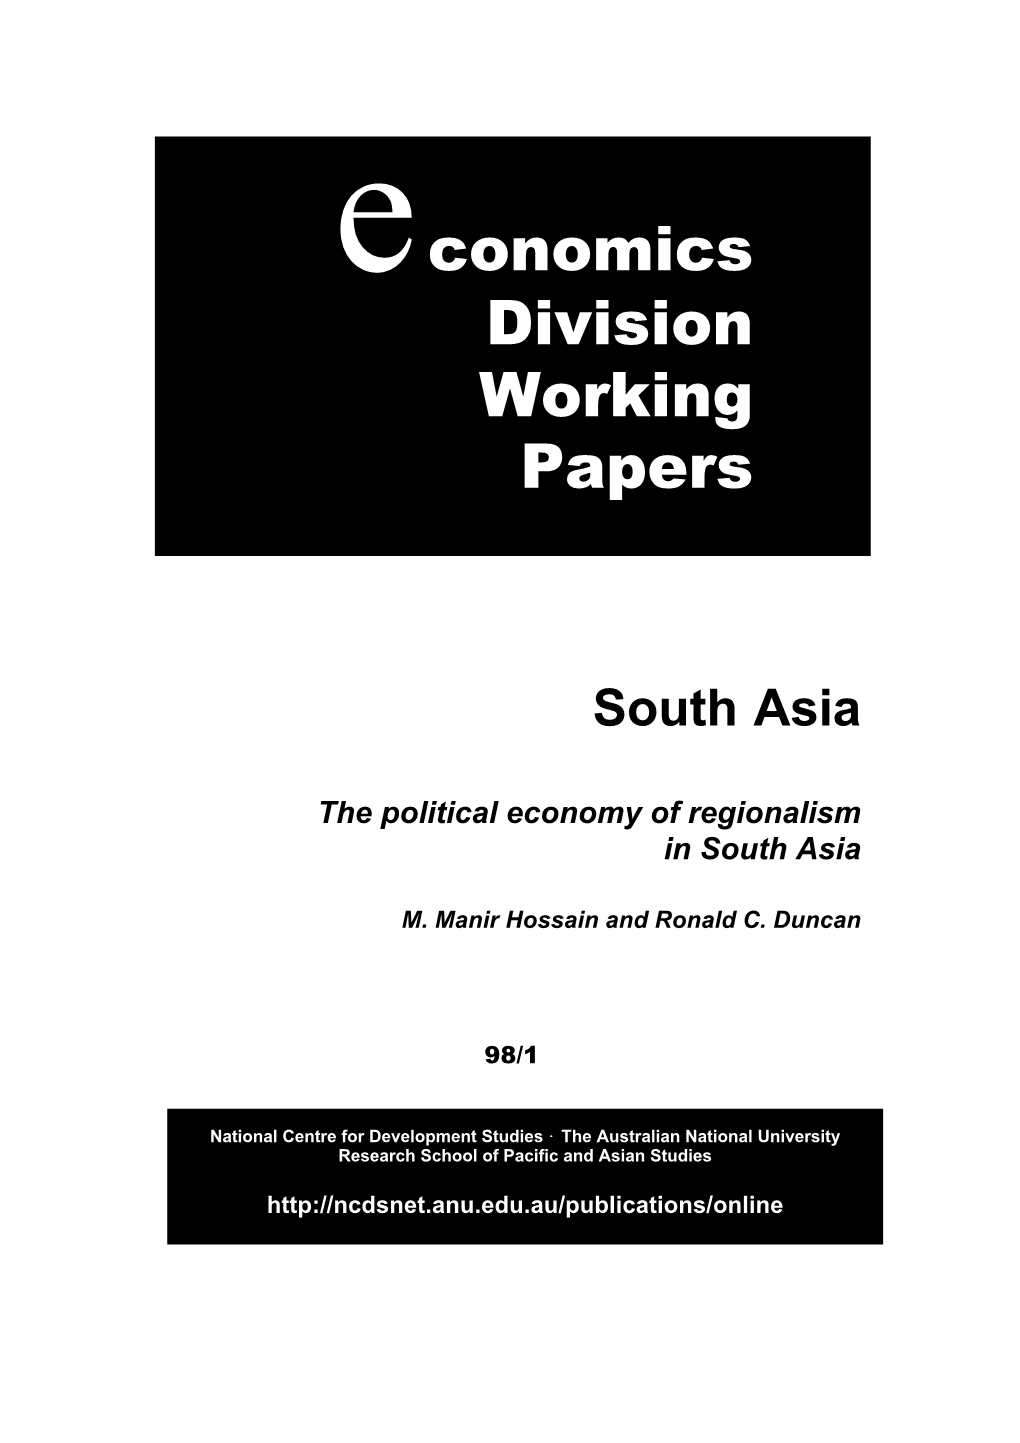 The Political Economy of Regionalism in South Asia